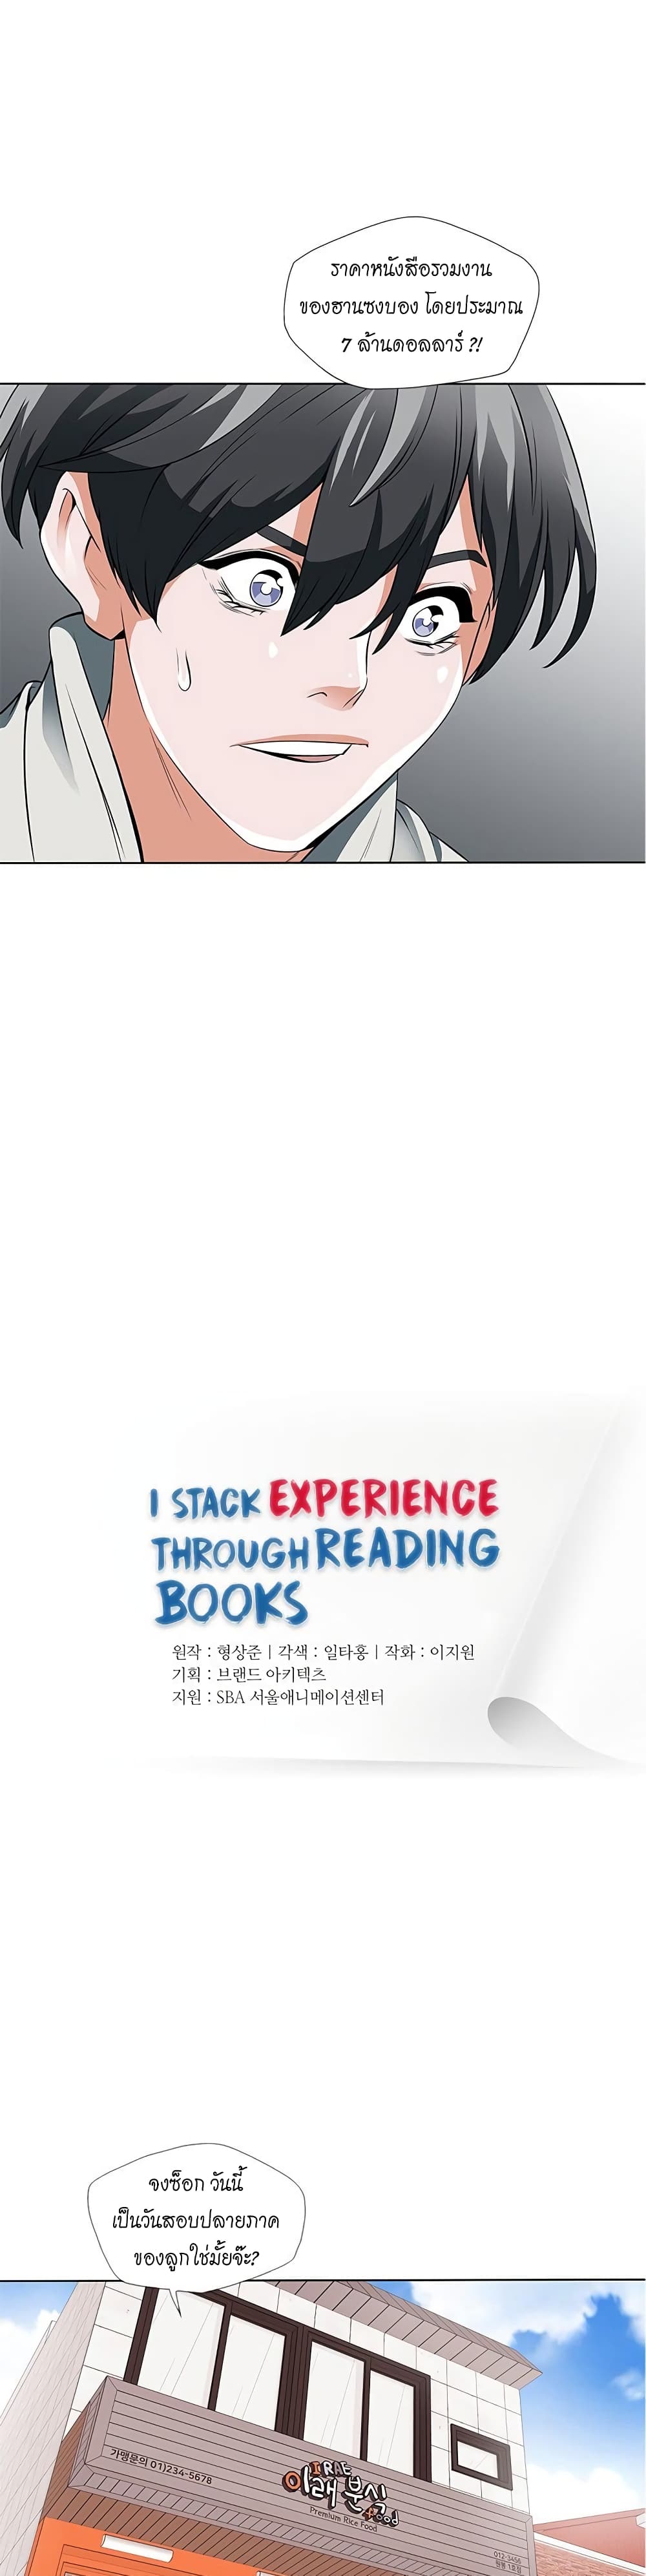 I Stack Experience Through Reading Books 9-9